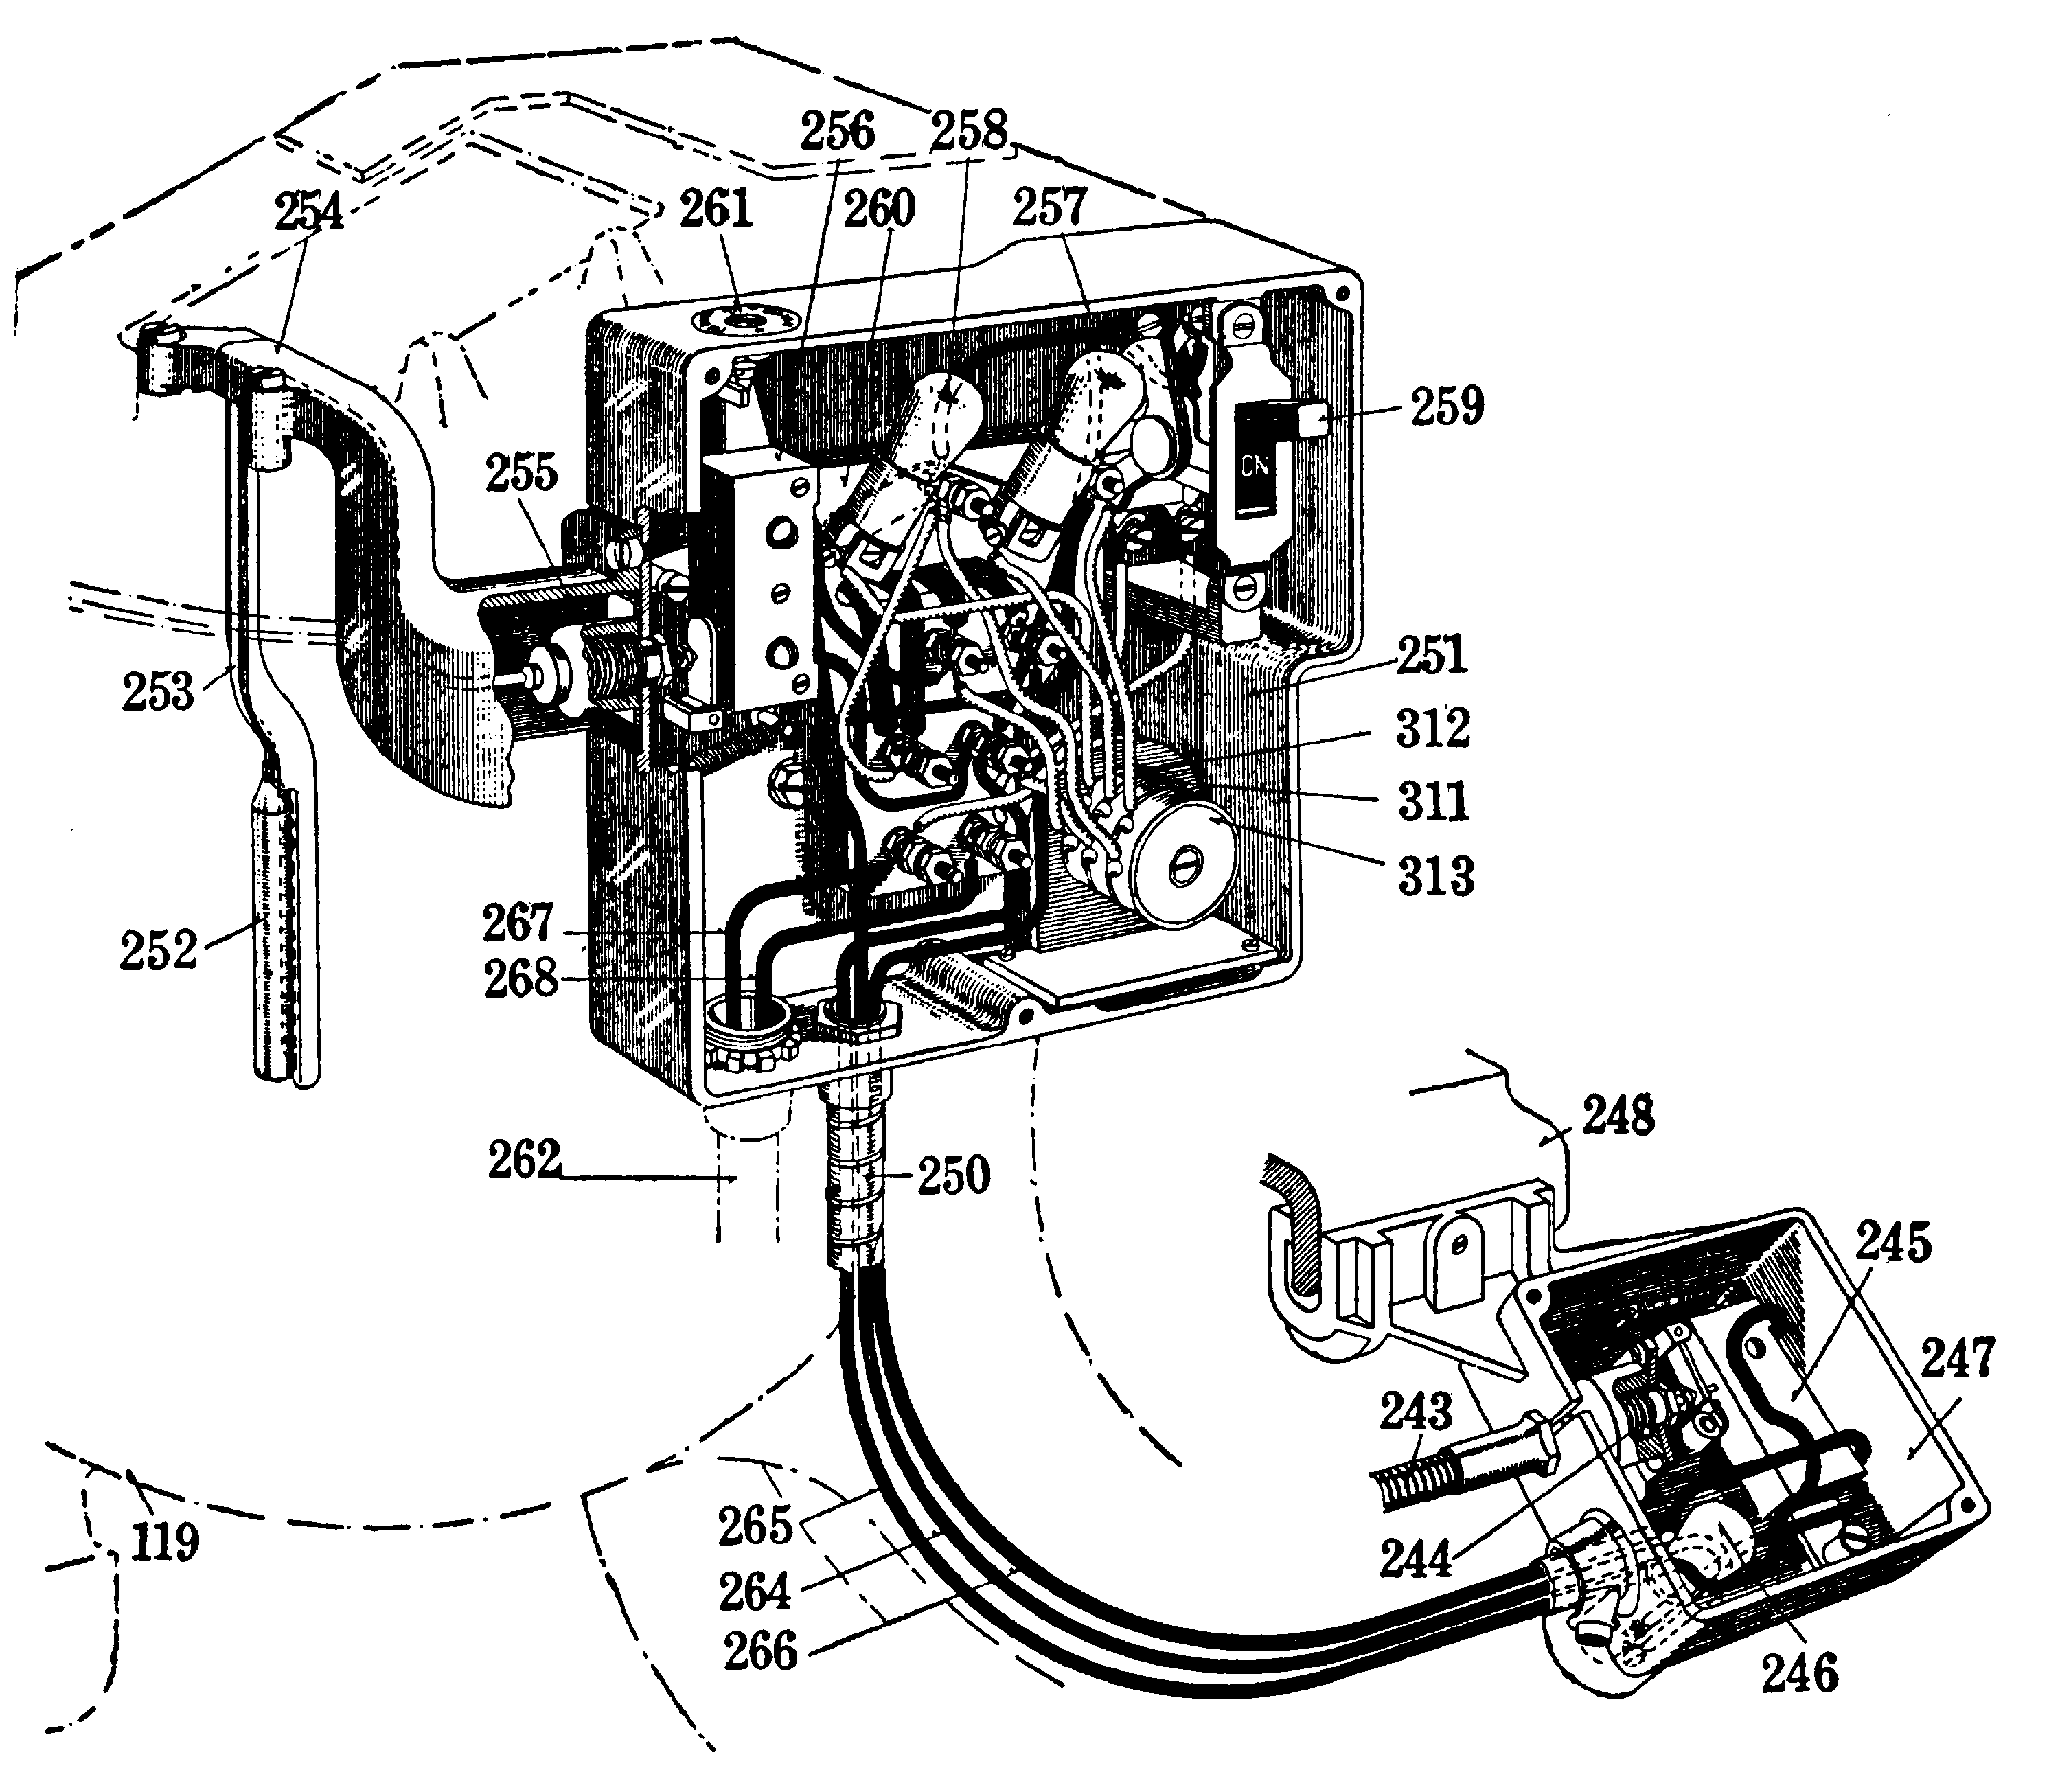 Line drawing of mouthpiece and Micro-Therm control unit.